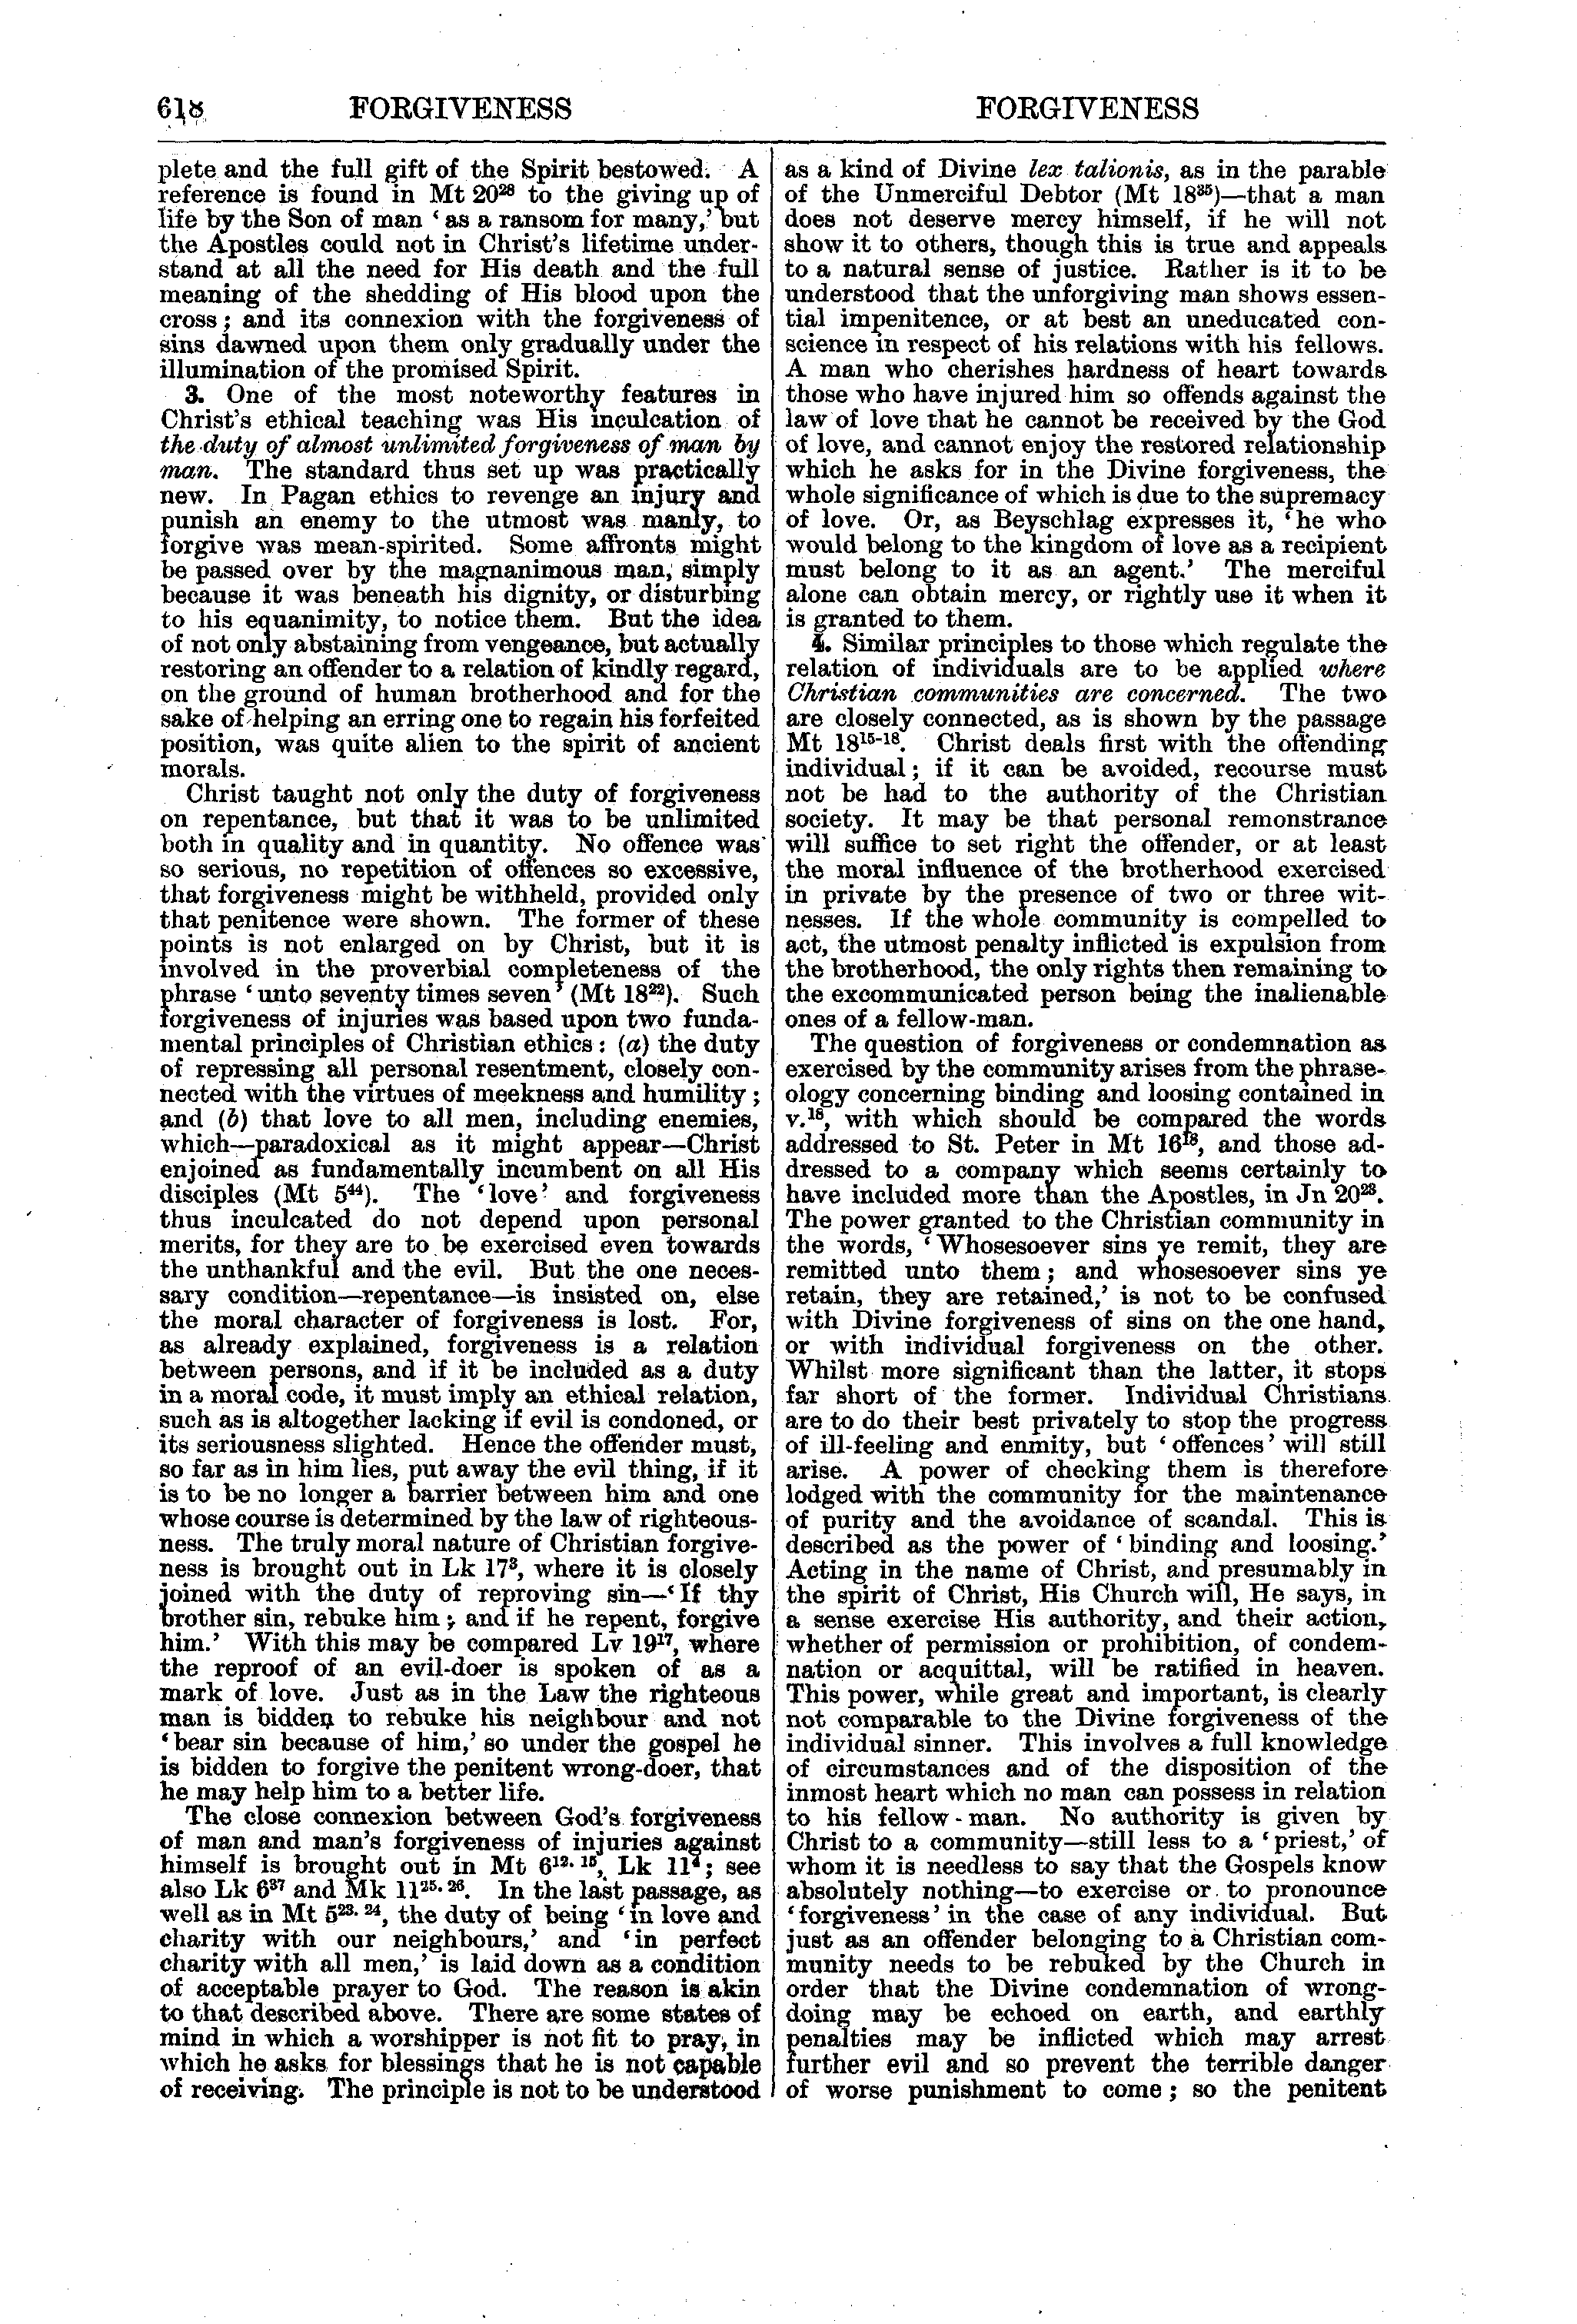 Image of page 618